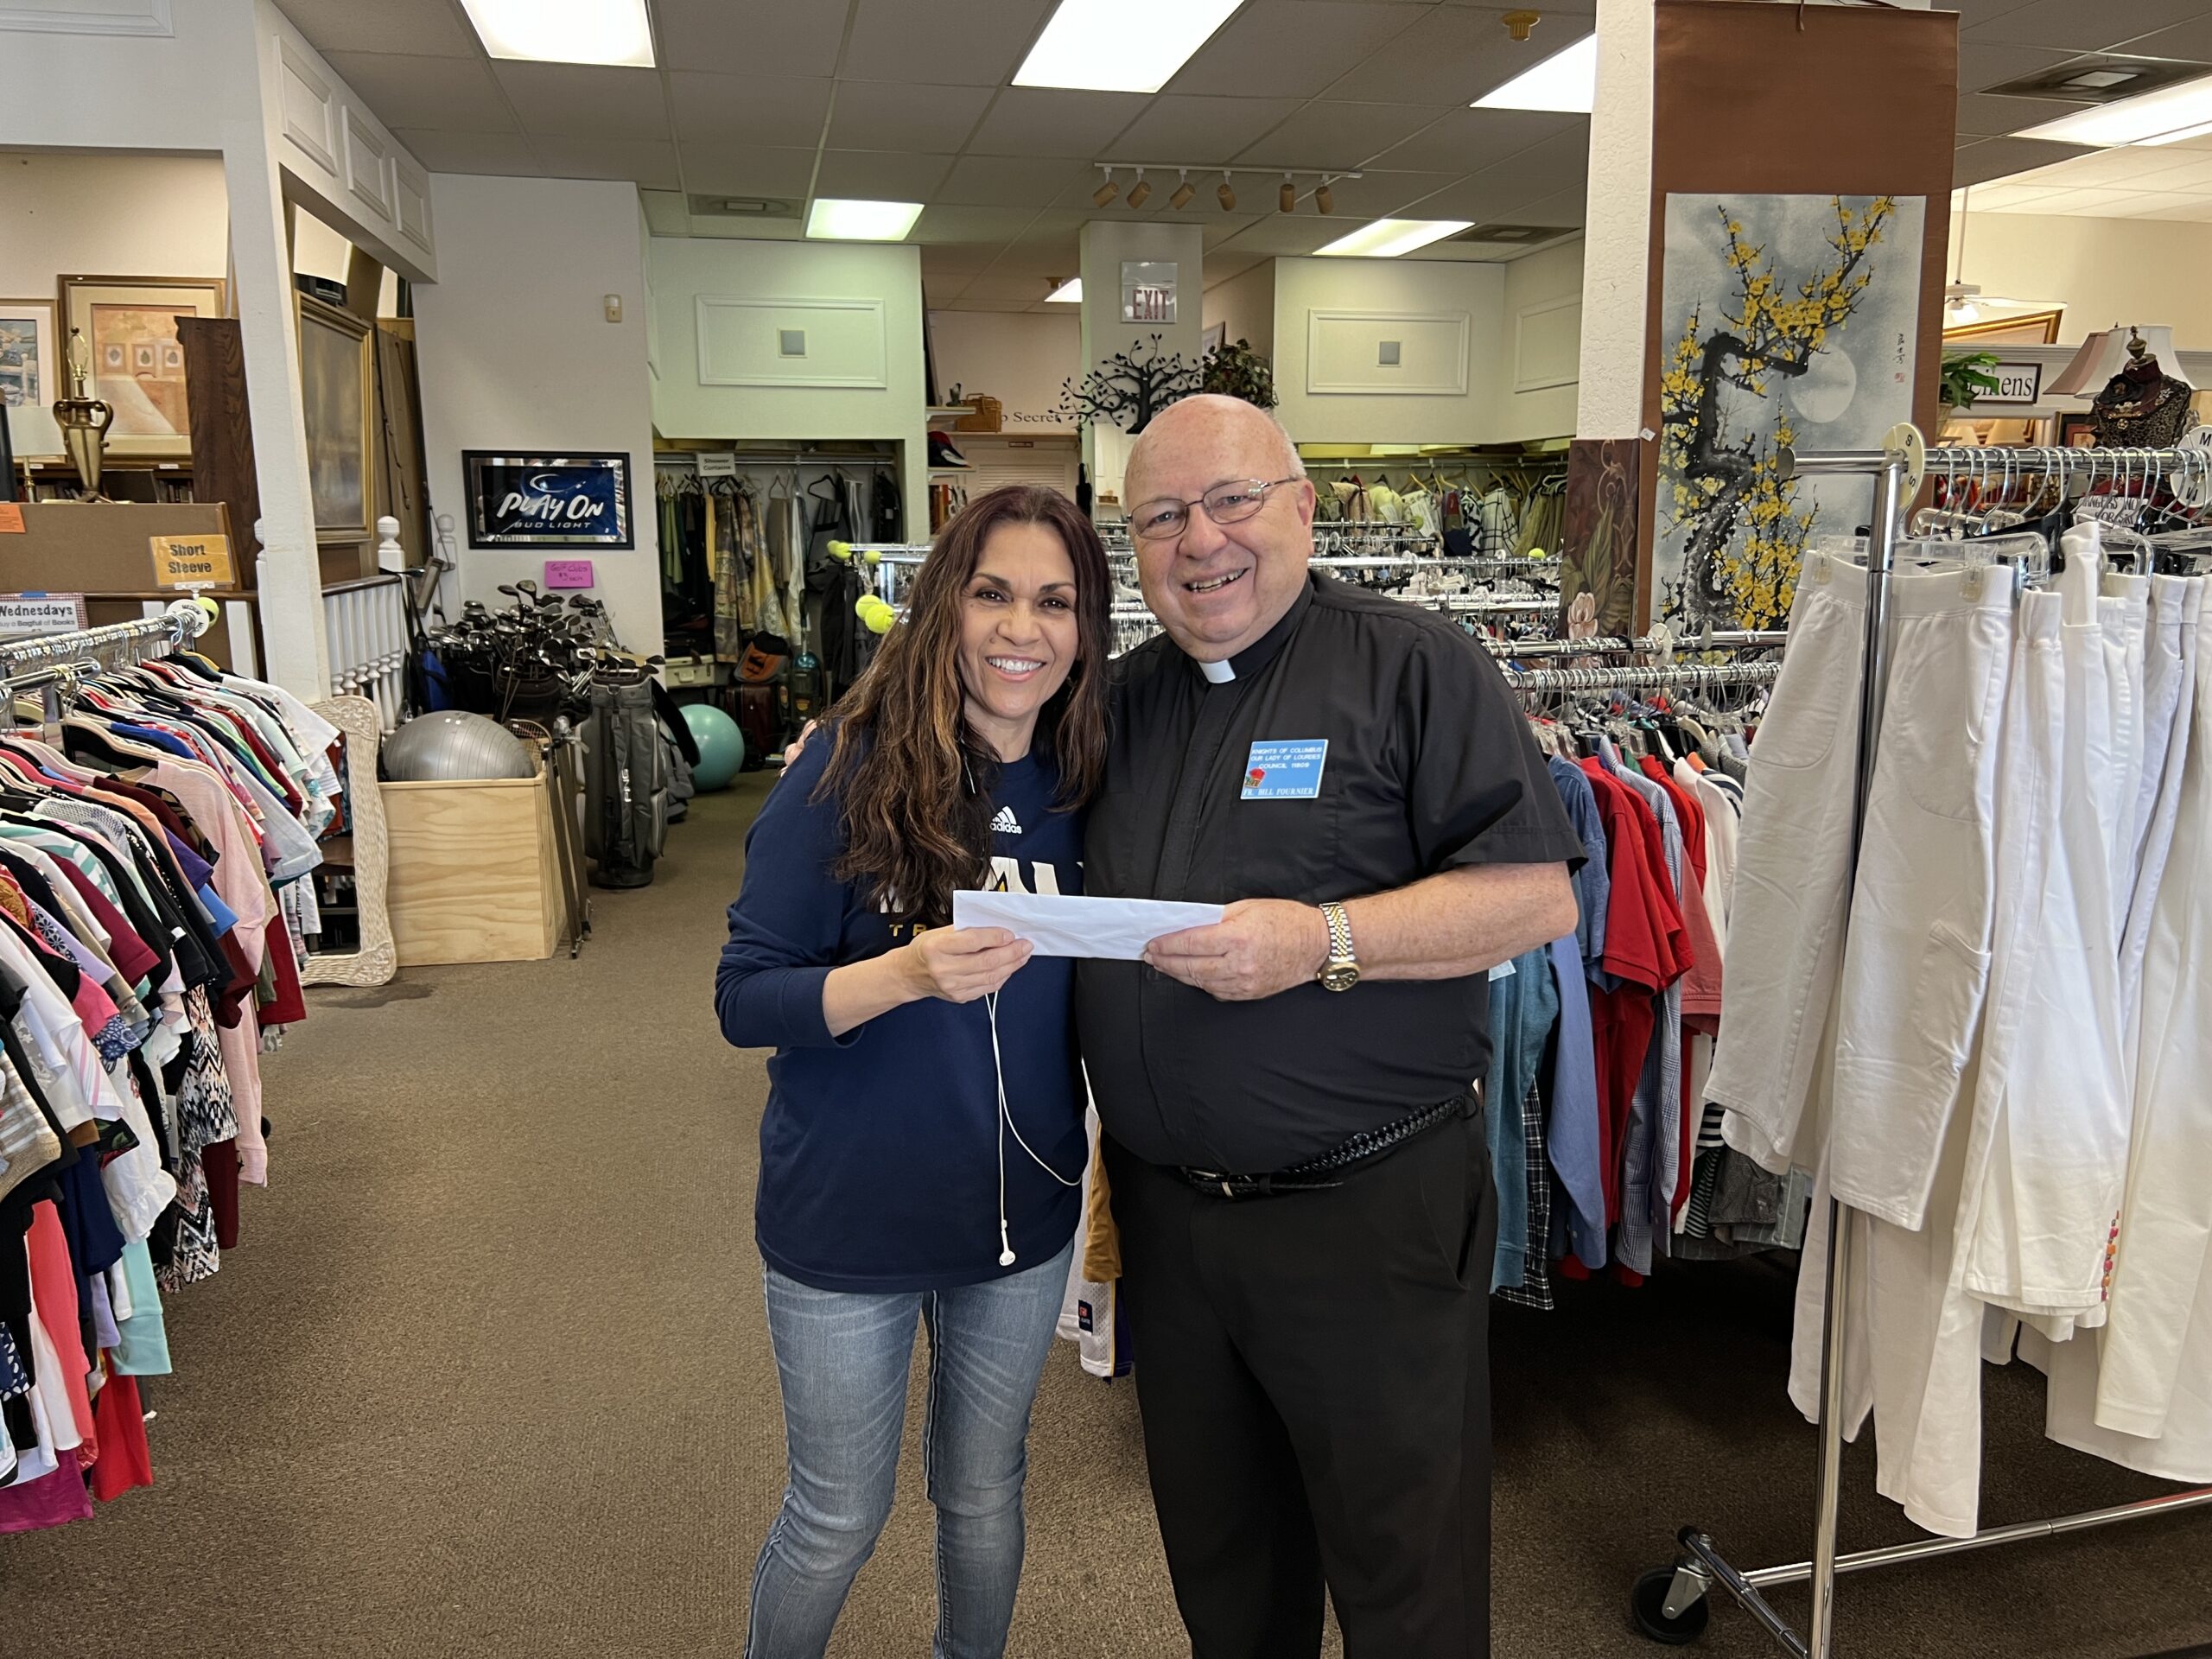 Event chair, Fr. Bill Fournier, presenting Carmen with the $2,750 check donation to Valley View Community Food Bank & Thrift Store